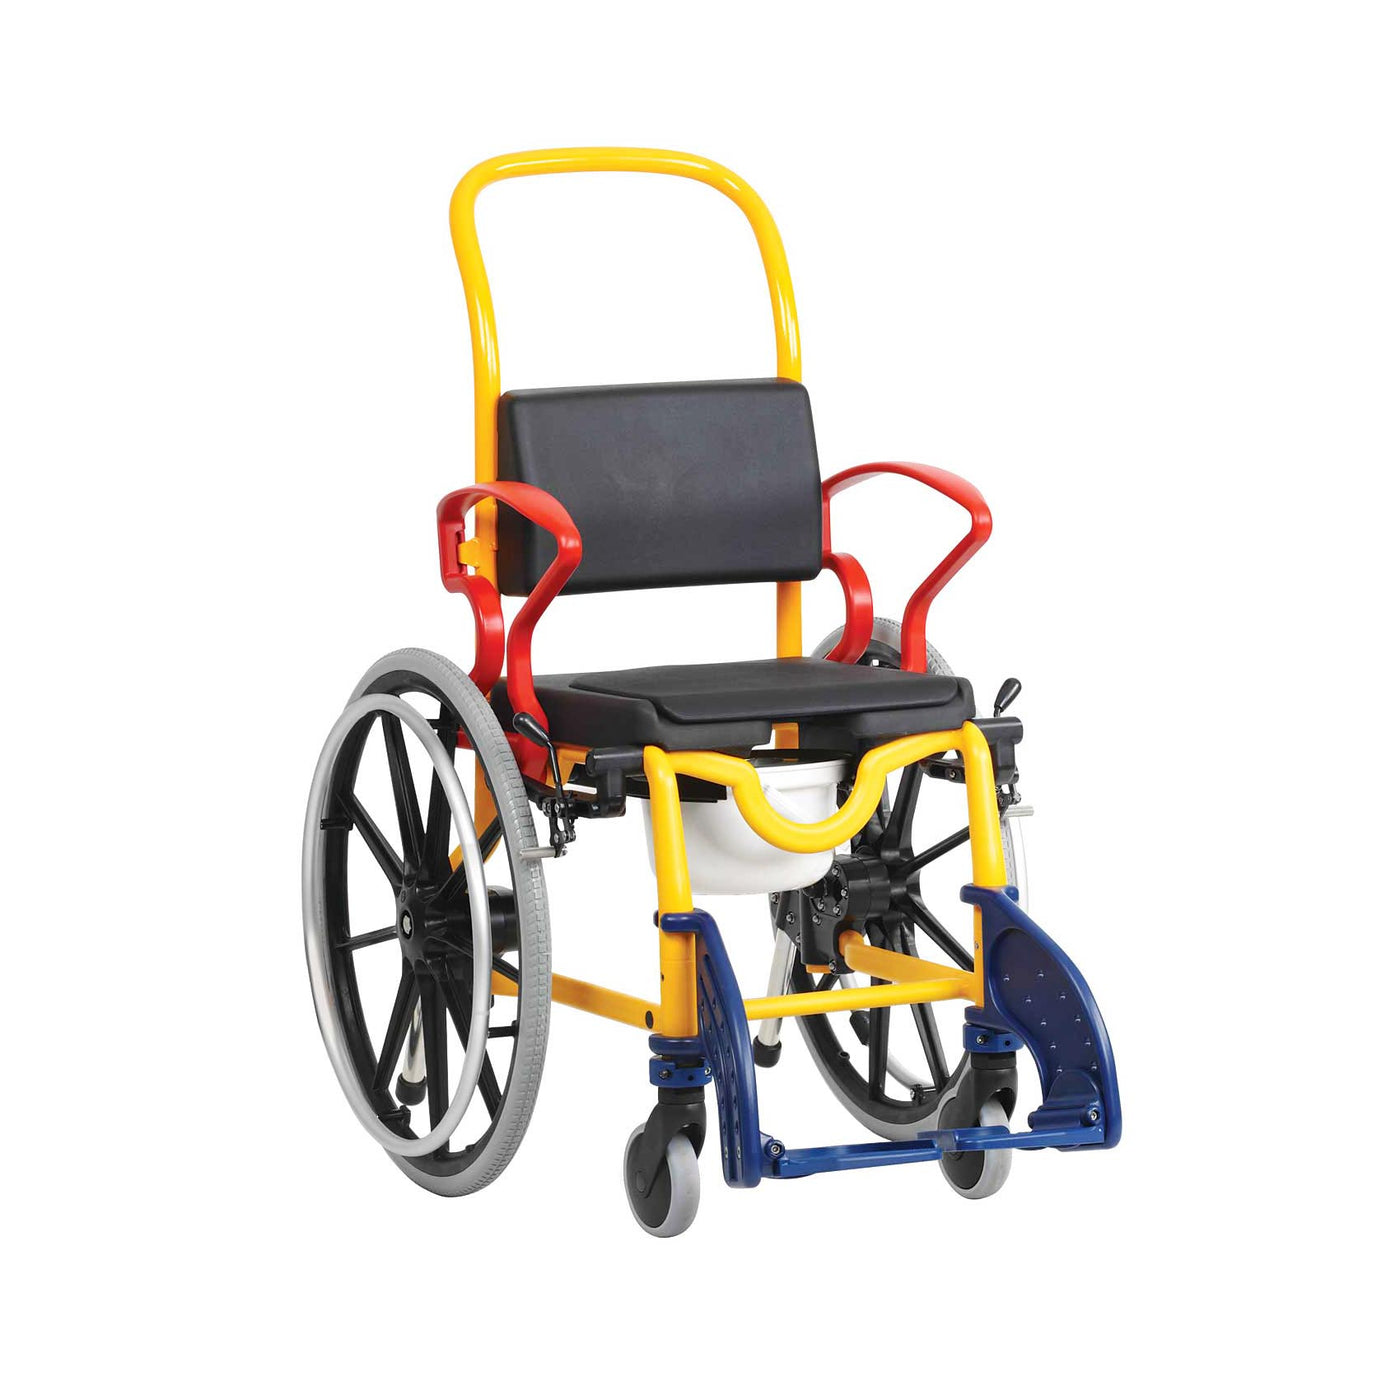 Rebotec Augsburg 24 – Self Propelled Child Commode Wheelchair